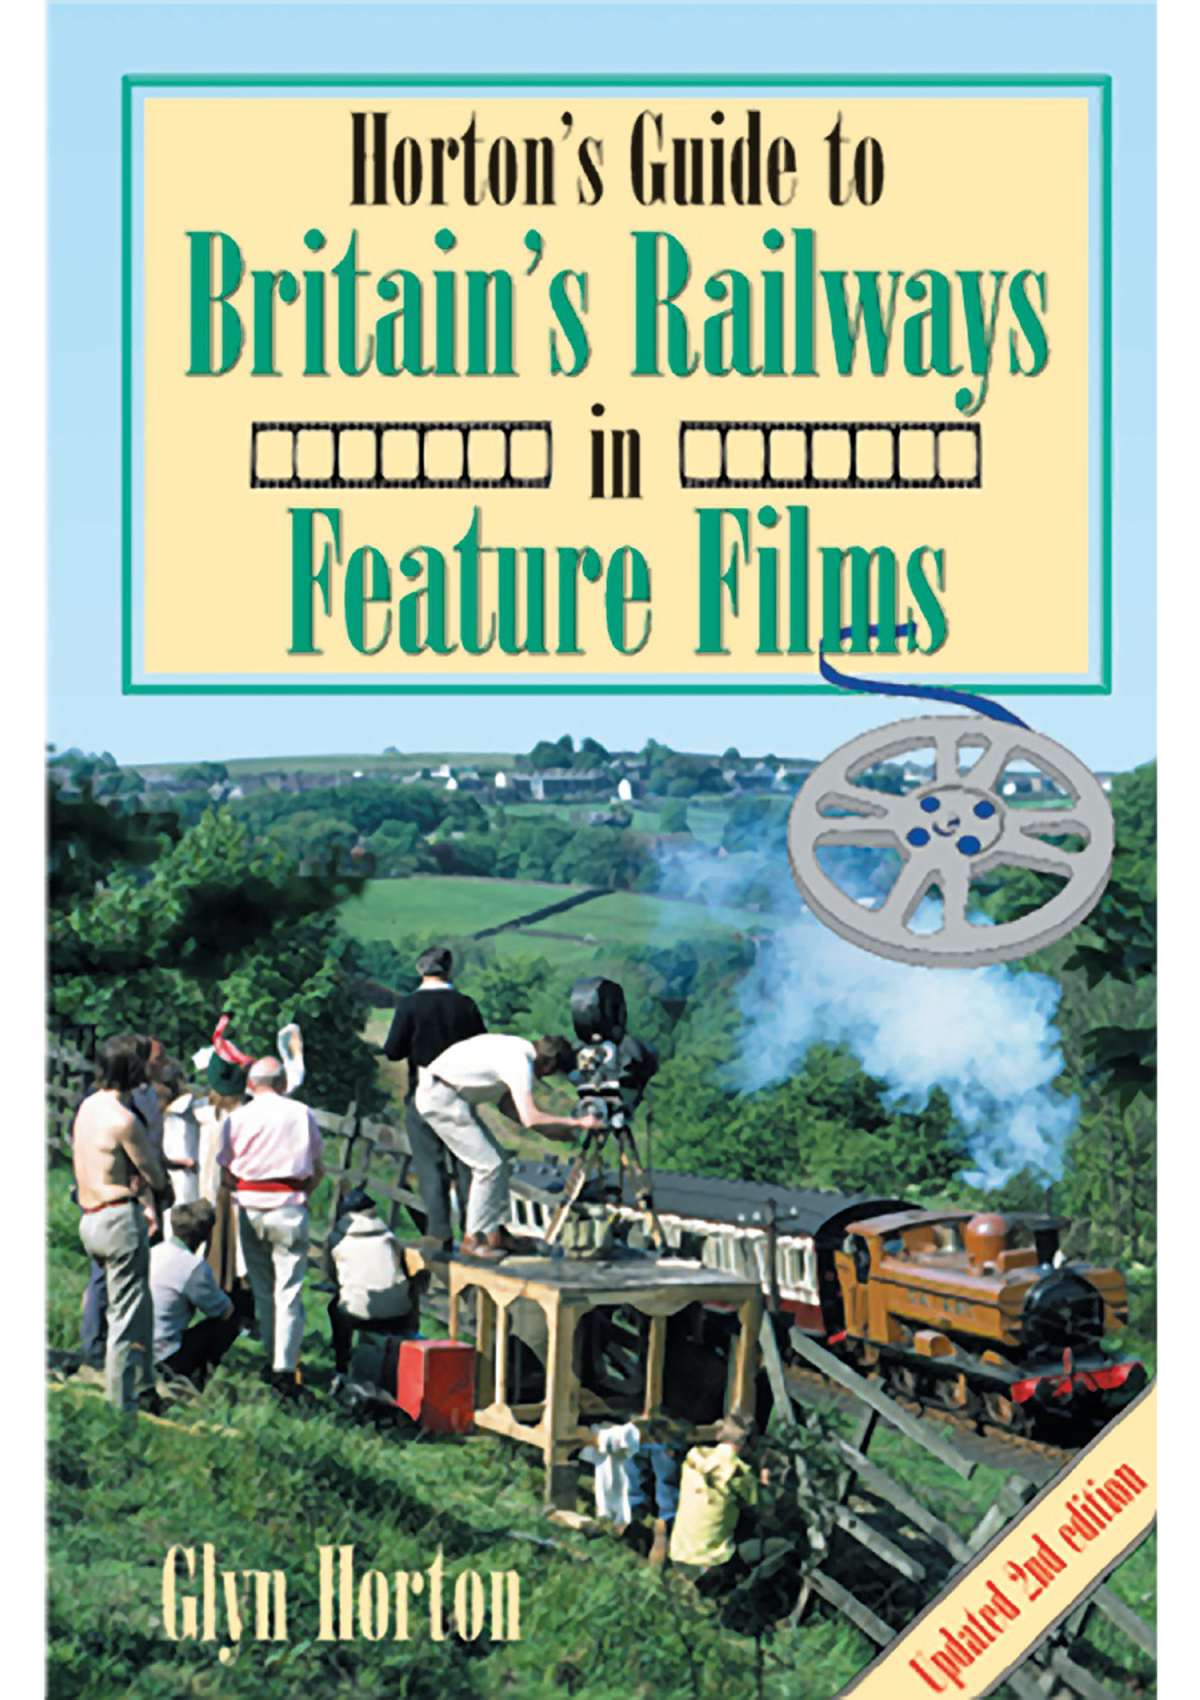 3344 - Horton's Guide to Britain's Railways in Feature Films